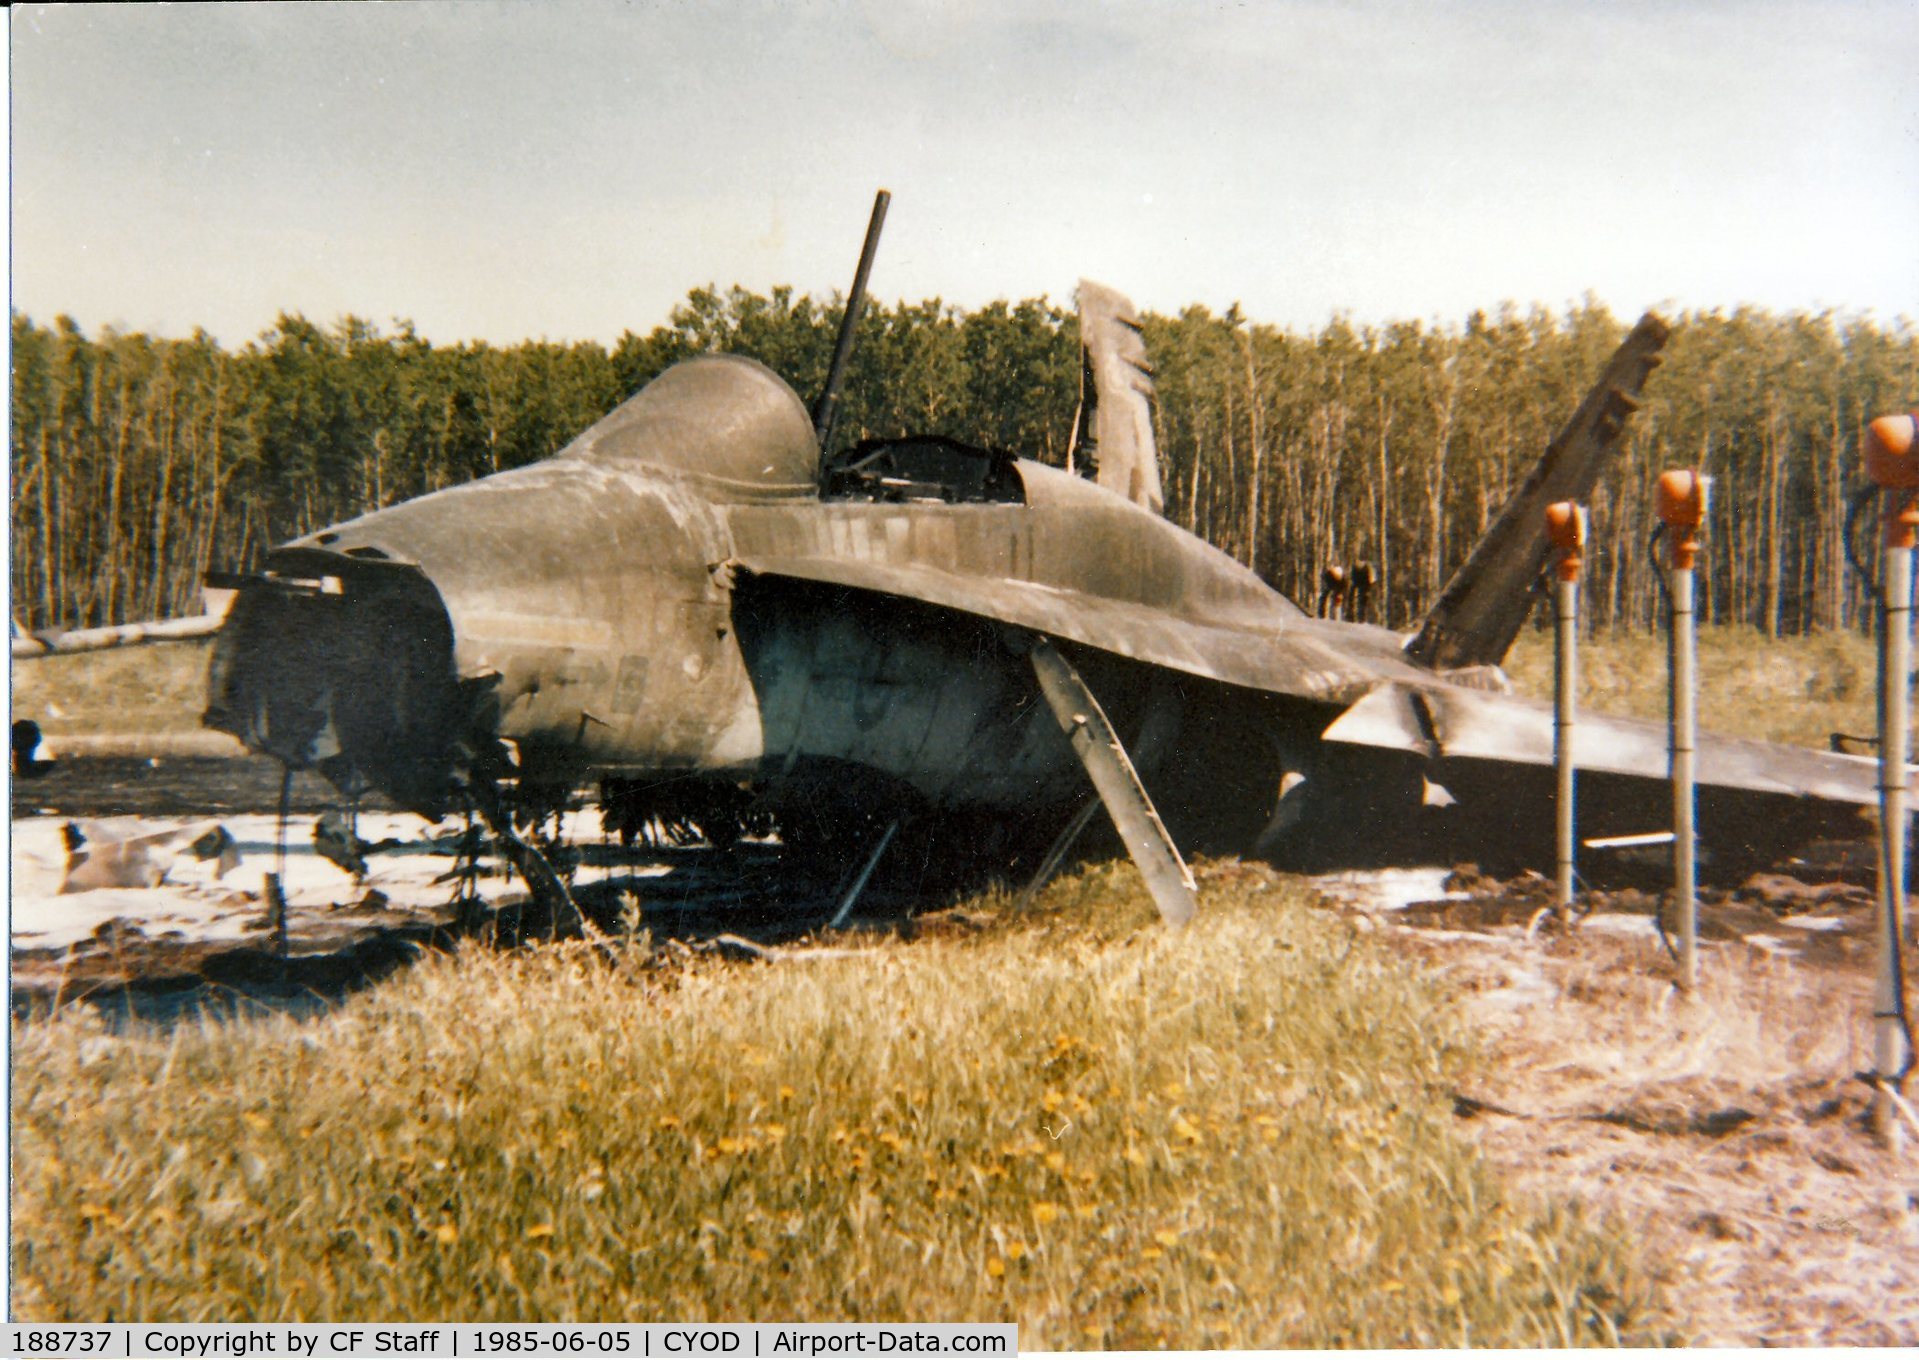 188737, McDonnell Douglas CF-188A Hornet C/N 269/A215, CAF CF-18 Hornet 188737 crashed during formation take off at CFB Cold Lake 4 June 1985.  Take-off trim was set to nose down instead of nose up.  Aircraft would not rotate even with full aft stick.   Pilot - Lt. Col. Dixon Kenny [Flight Leader].